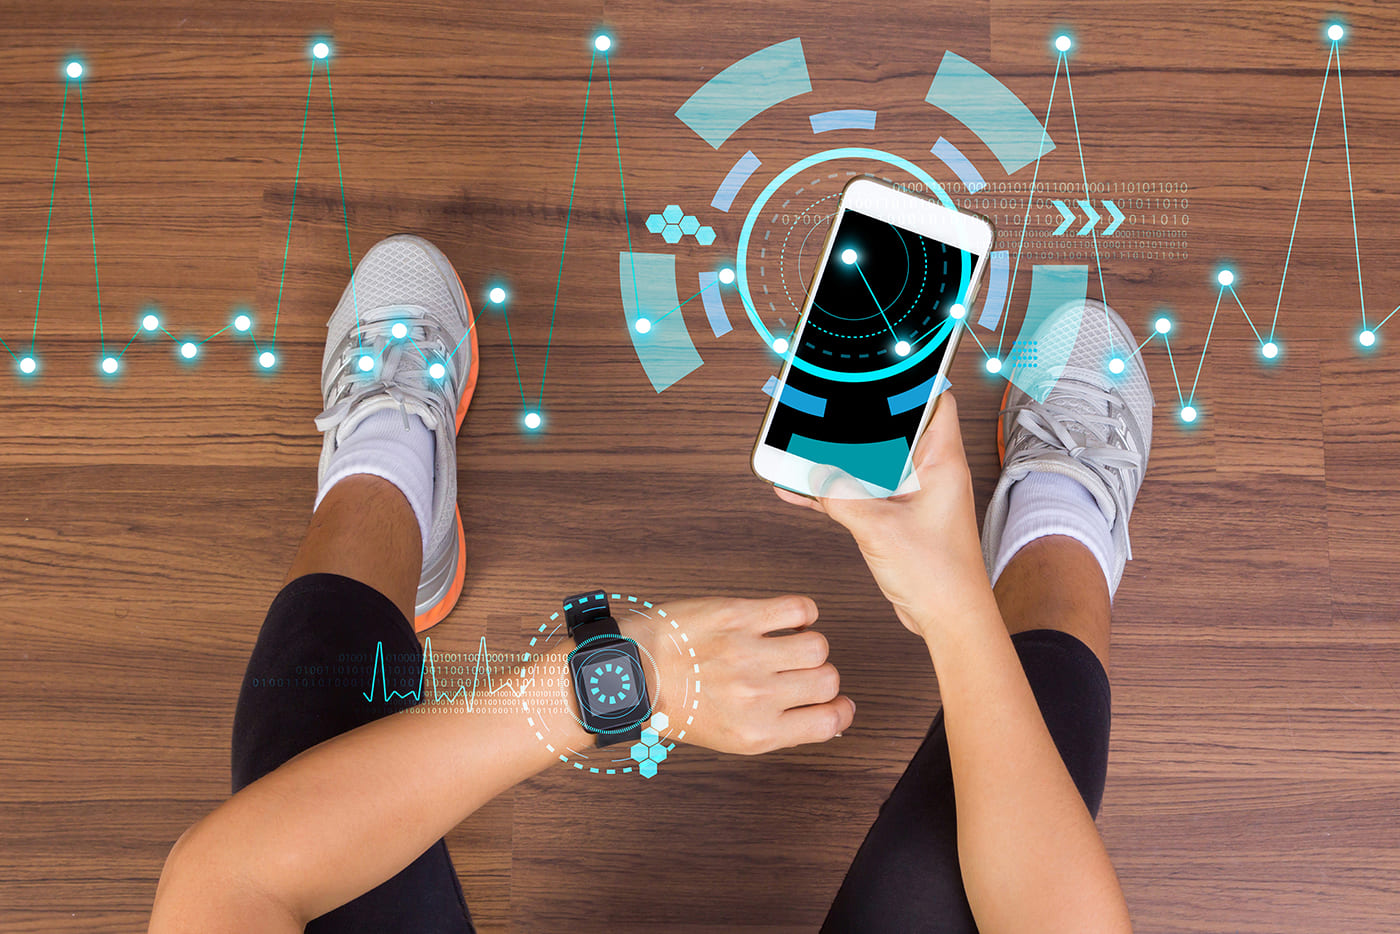 The 5 Biggest Fitness And Wellness Technology Trends In 2022 | Bernard Marr